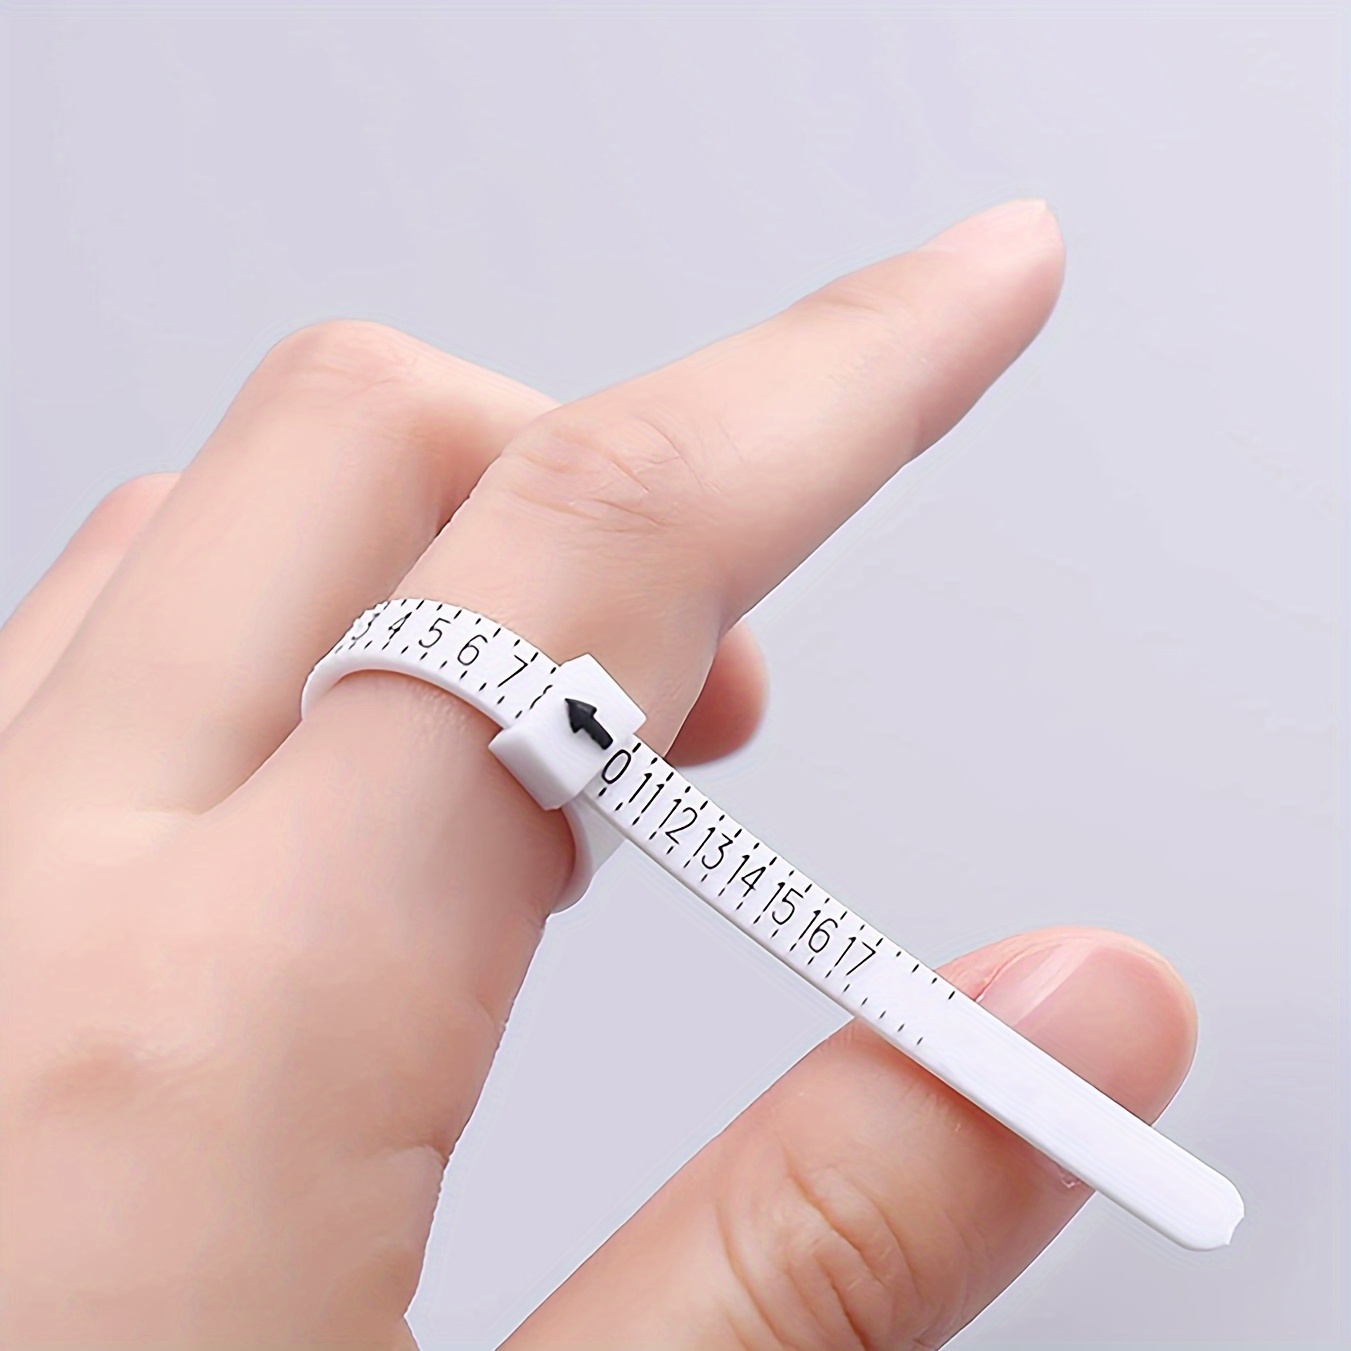 AllTopBargains 3 Pack Ring Sizer Plastic Gauge Jewelry Finger Measuring Tools Fitter Sizes 2-13